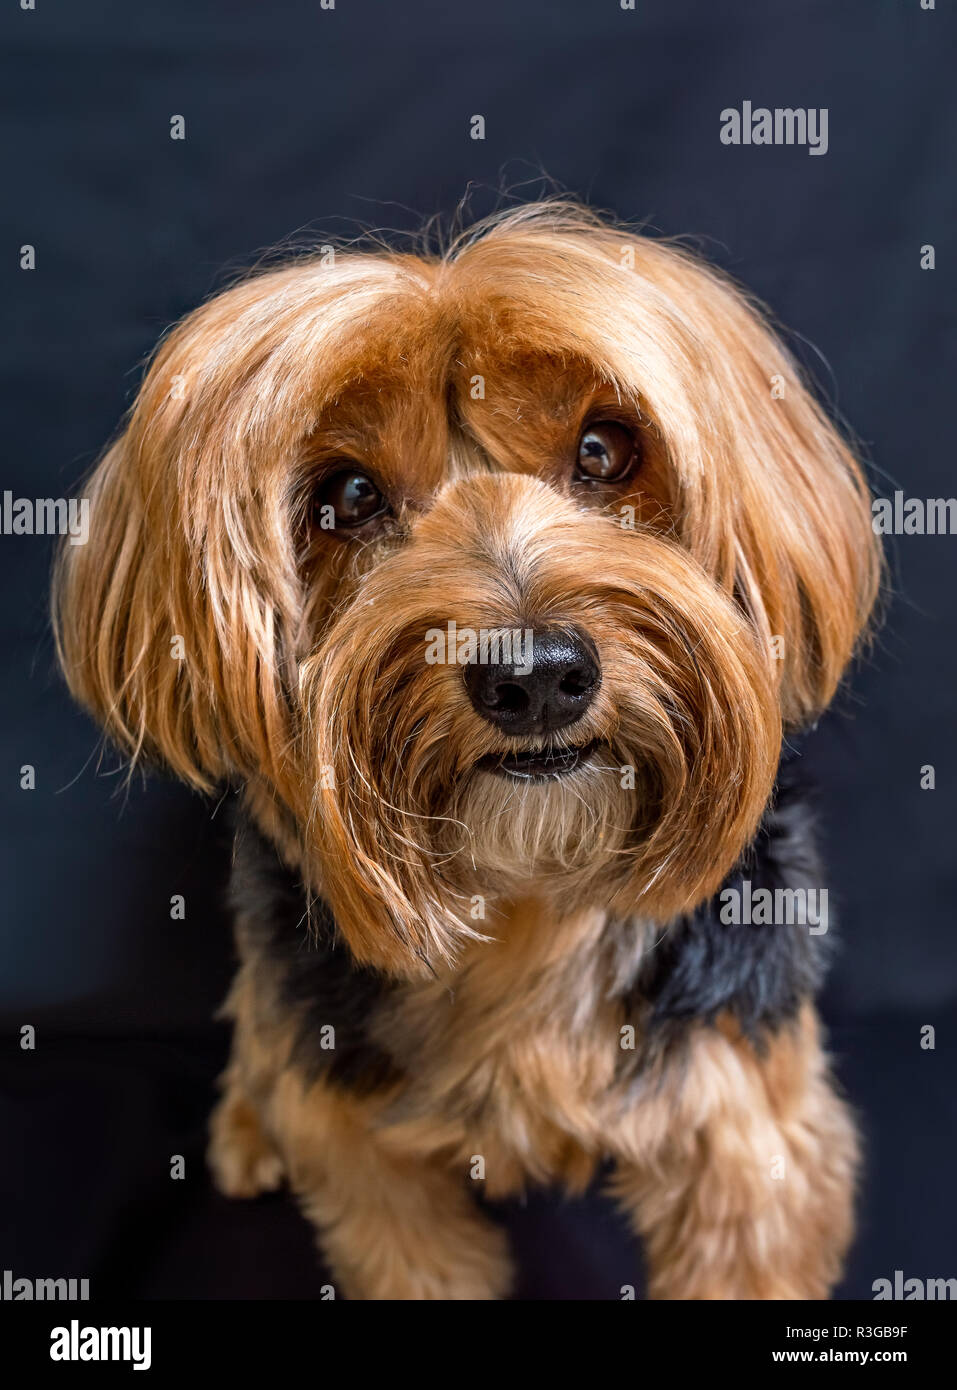 Yorkshire Terrier portrait closeup of the head over black background Stock Photo